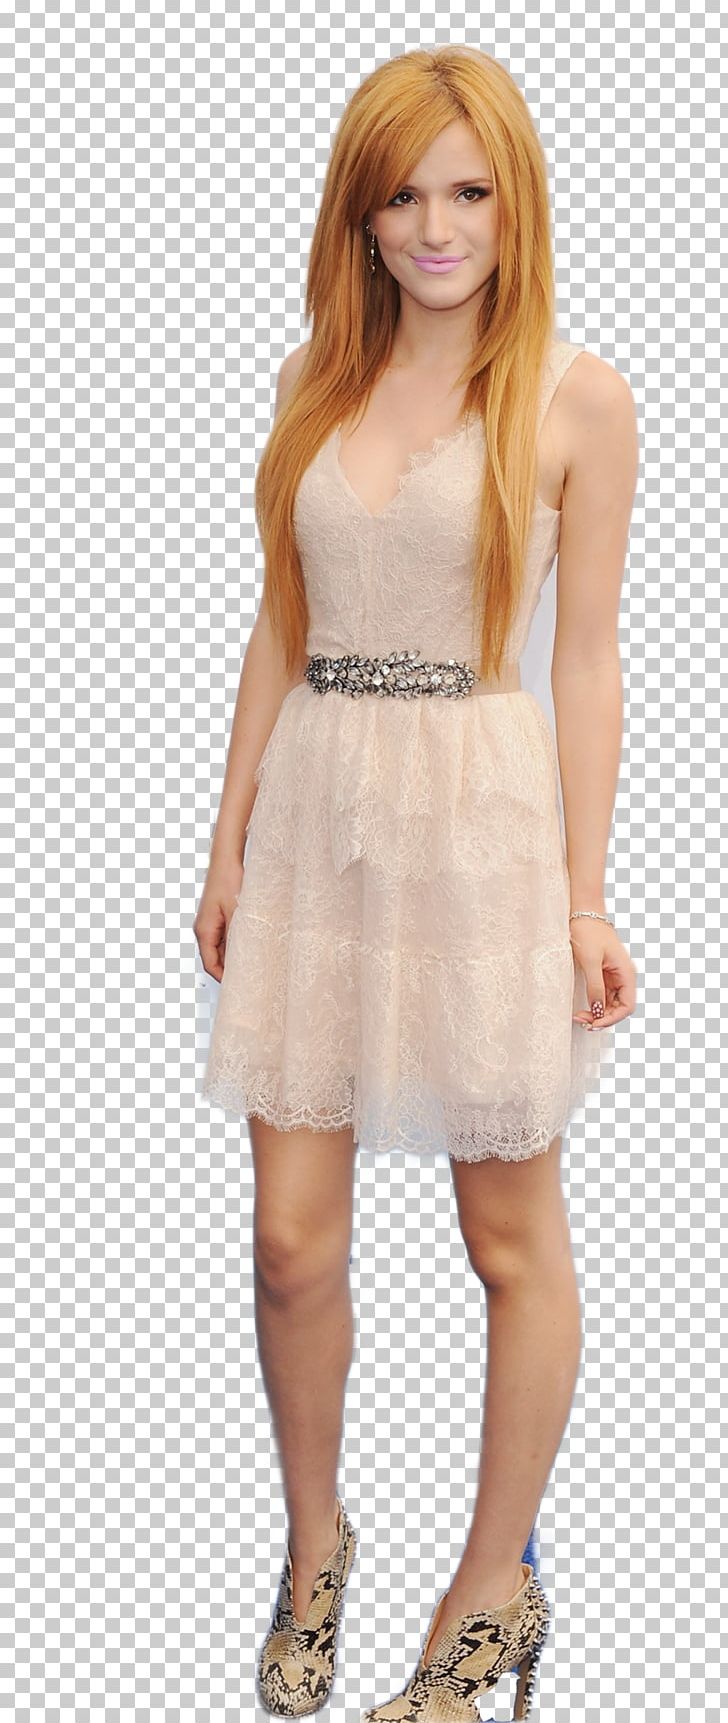 Bella Thorne Model Dress Photo Shoot PNG, Clipart, Bella Thorne, Celebrities, Clothing, Cocktail Dress, Dani Thorne Free PNG Download